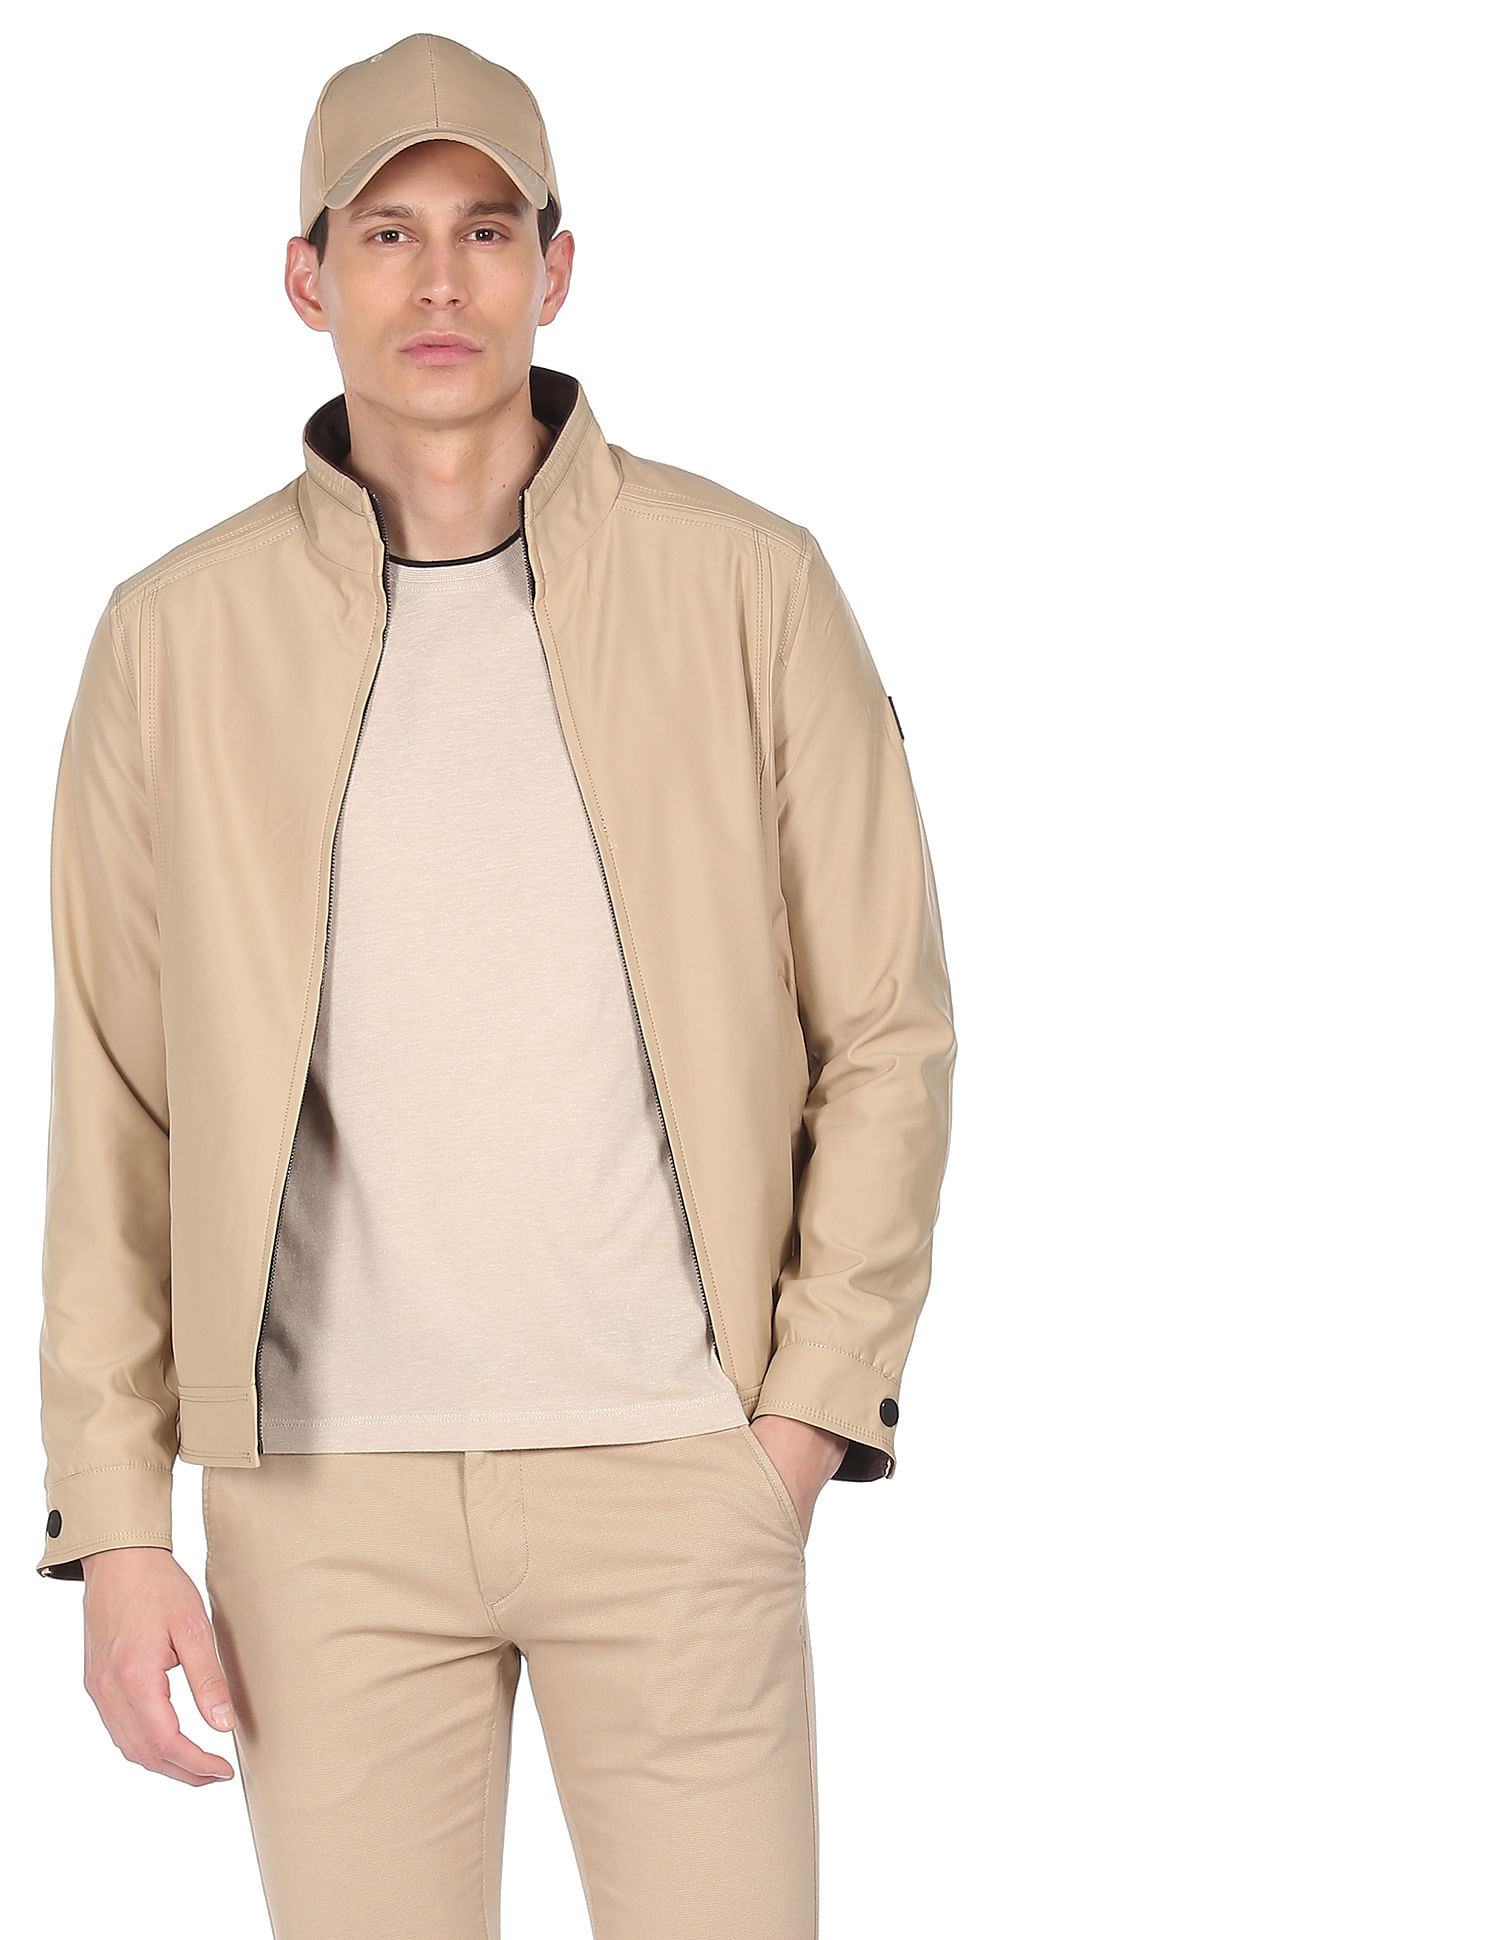 Buy Arrow Sports Stand Collar Reversible Jacket - NNNOW.com